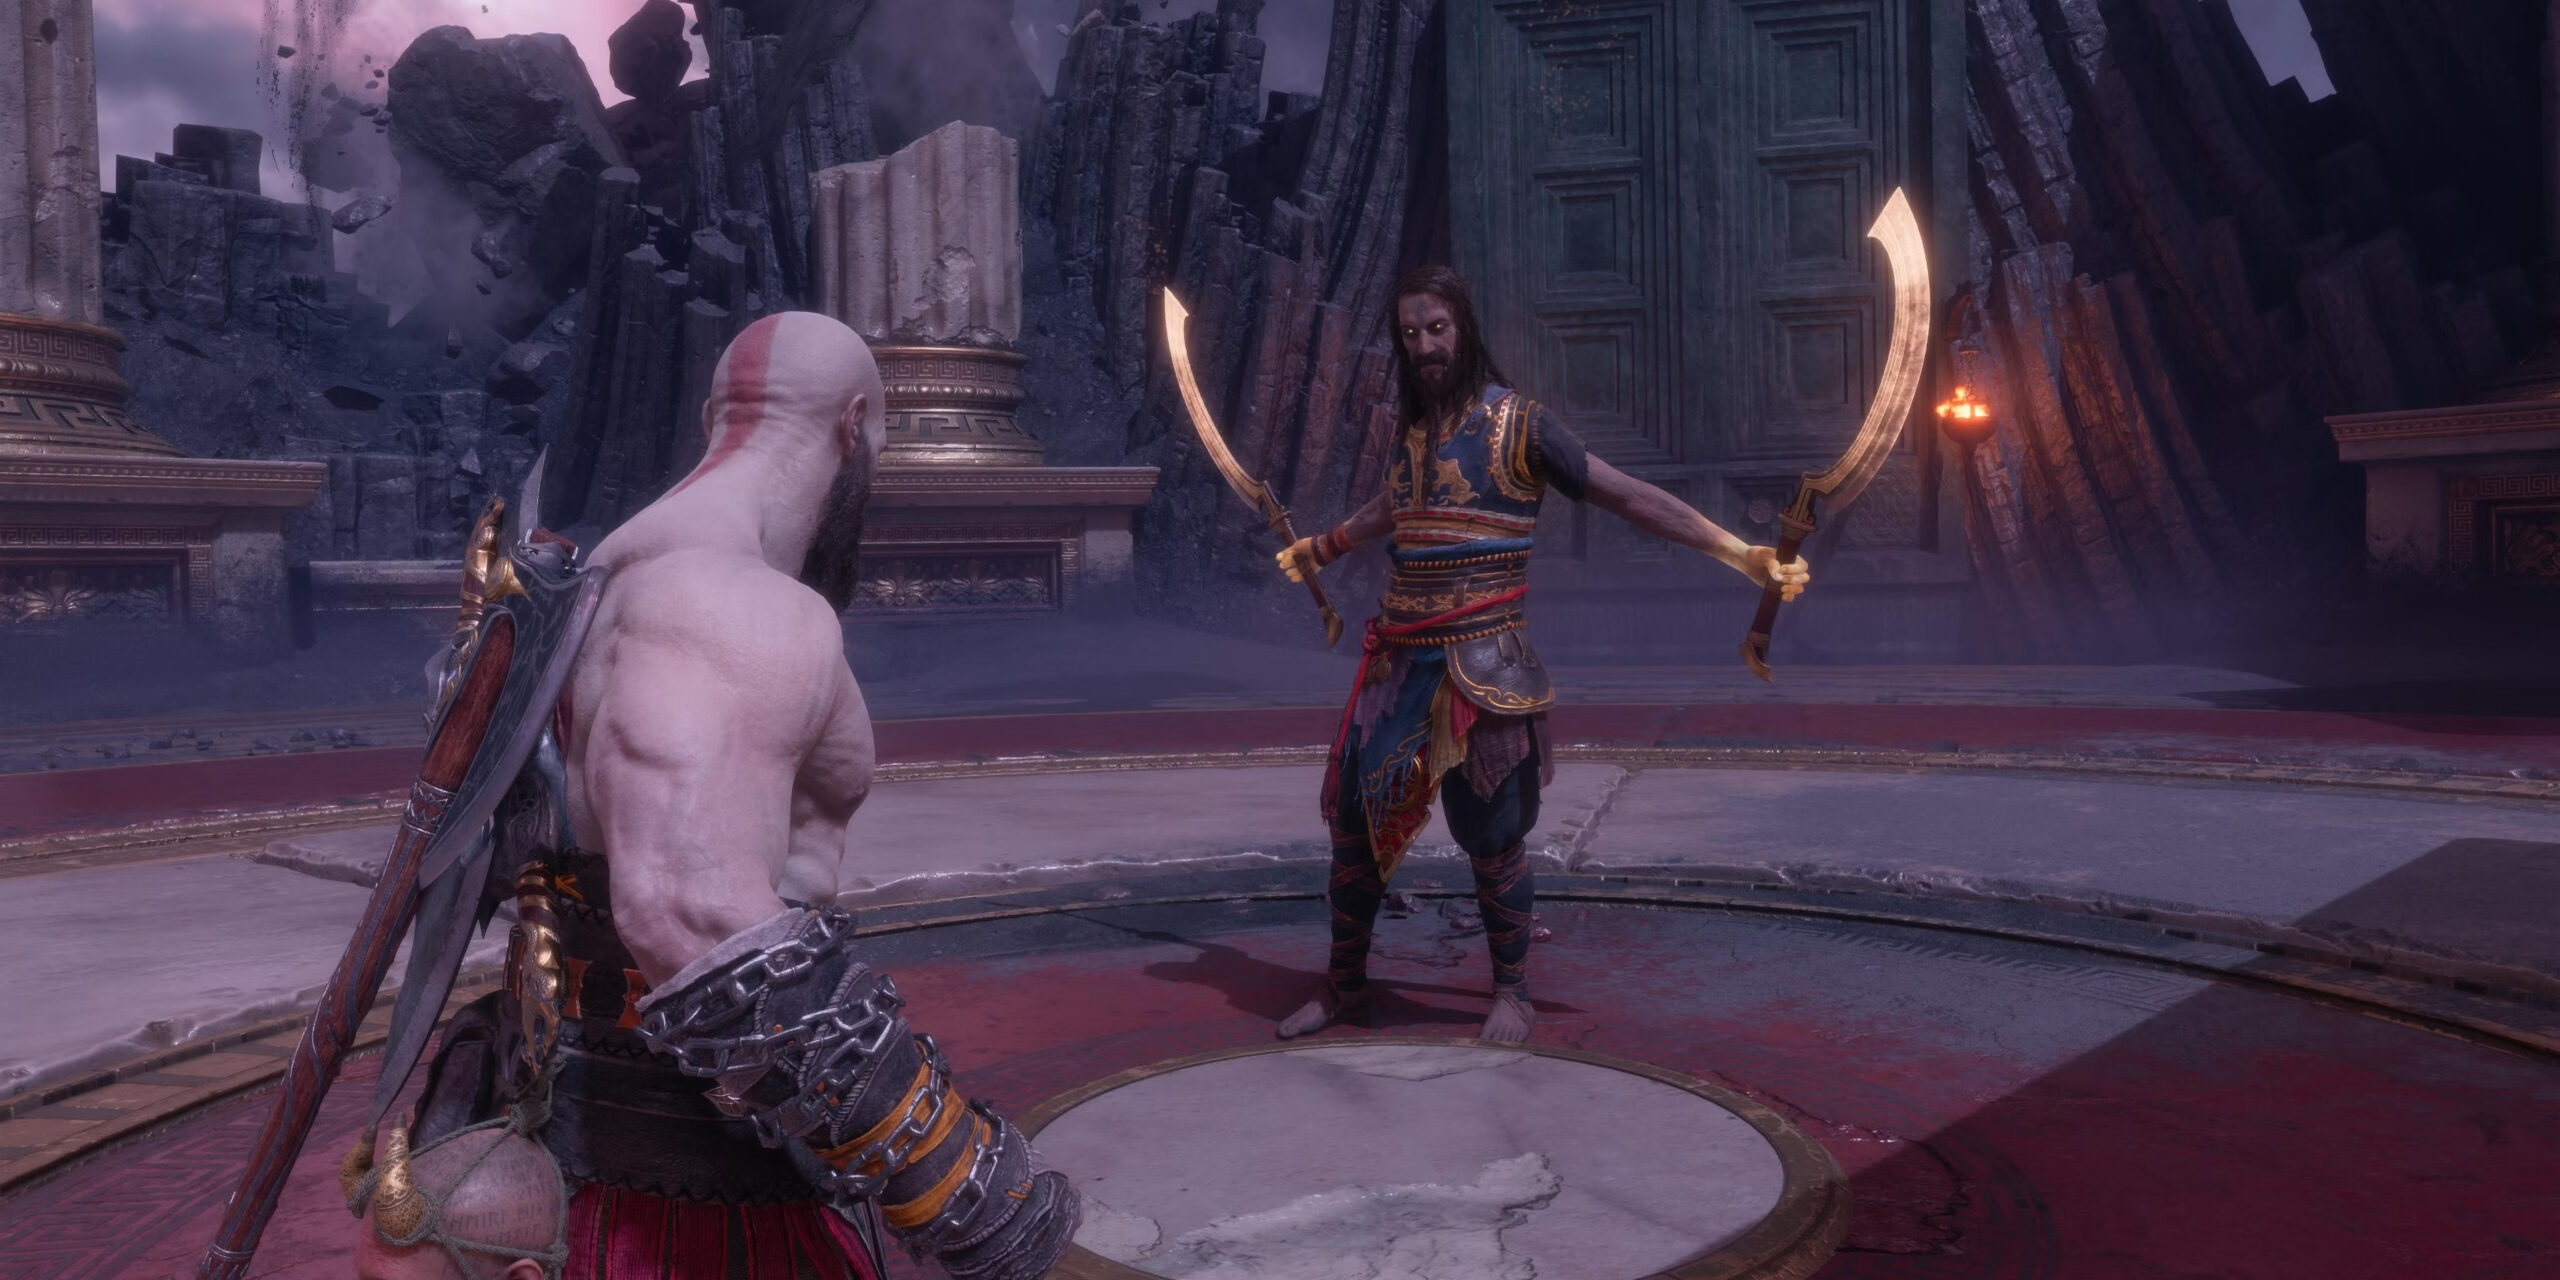 Battle of Kratos and Tyr